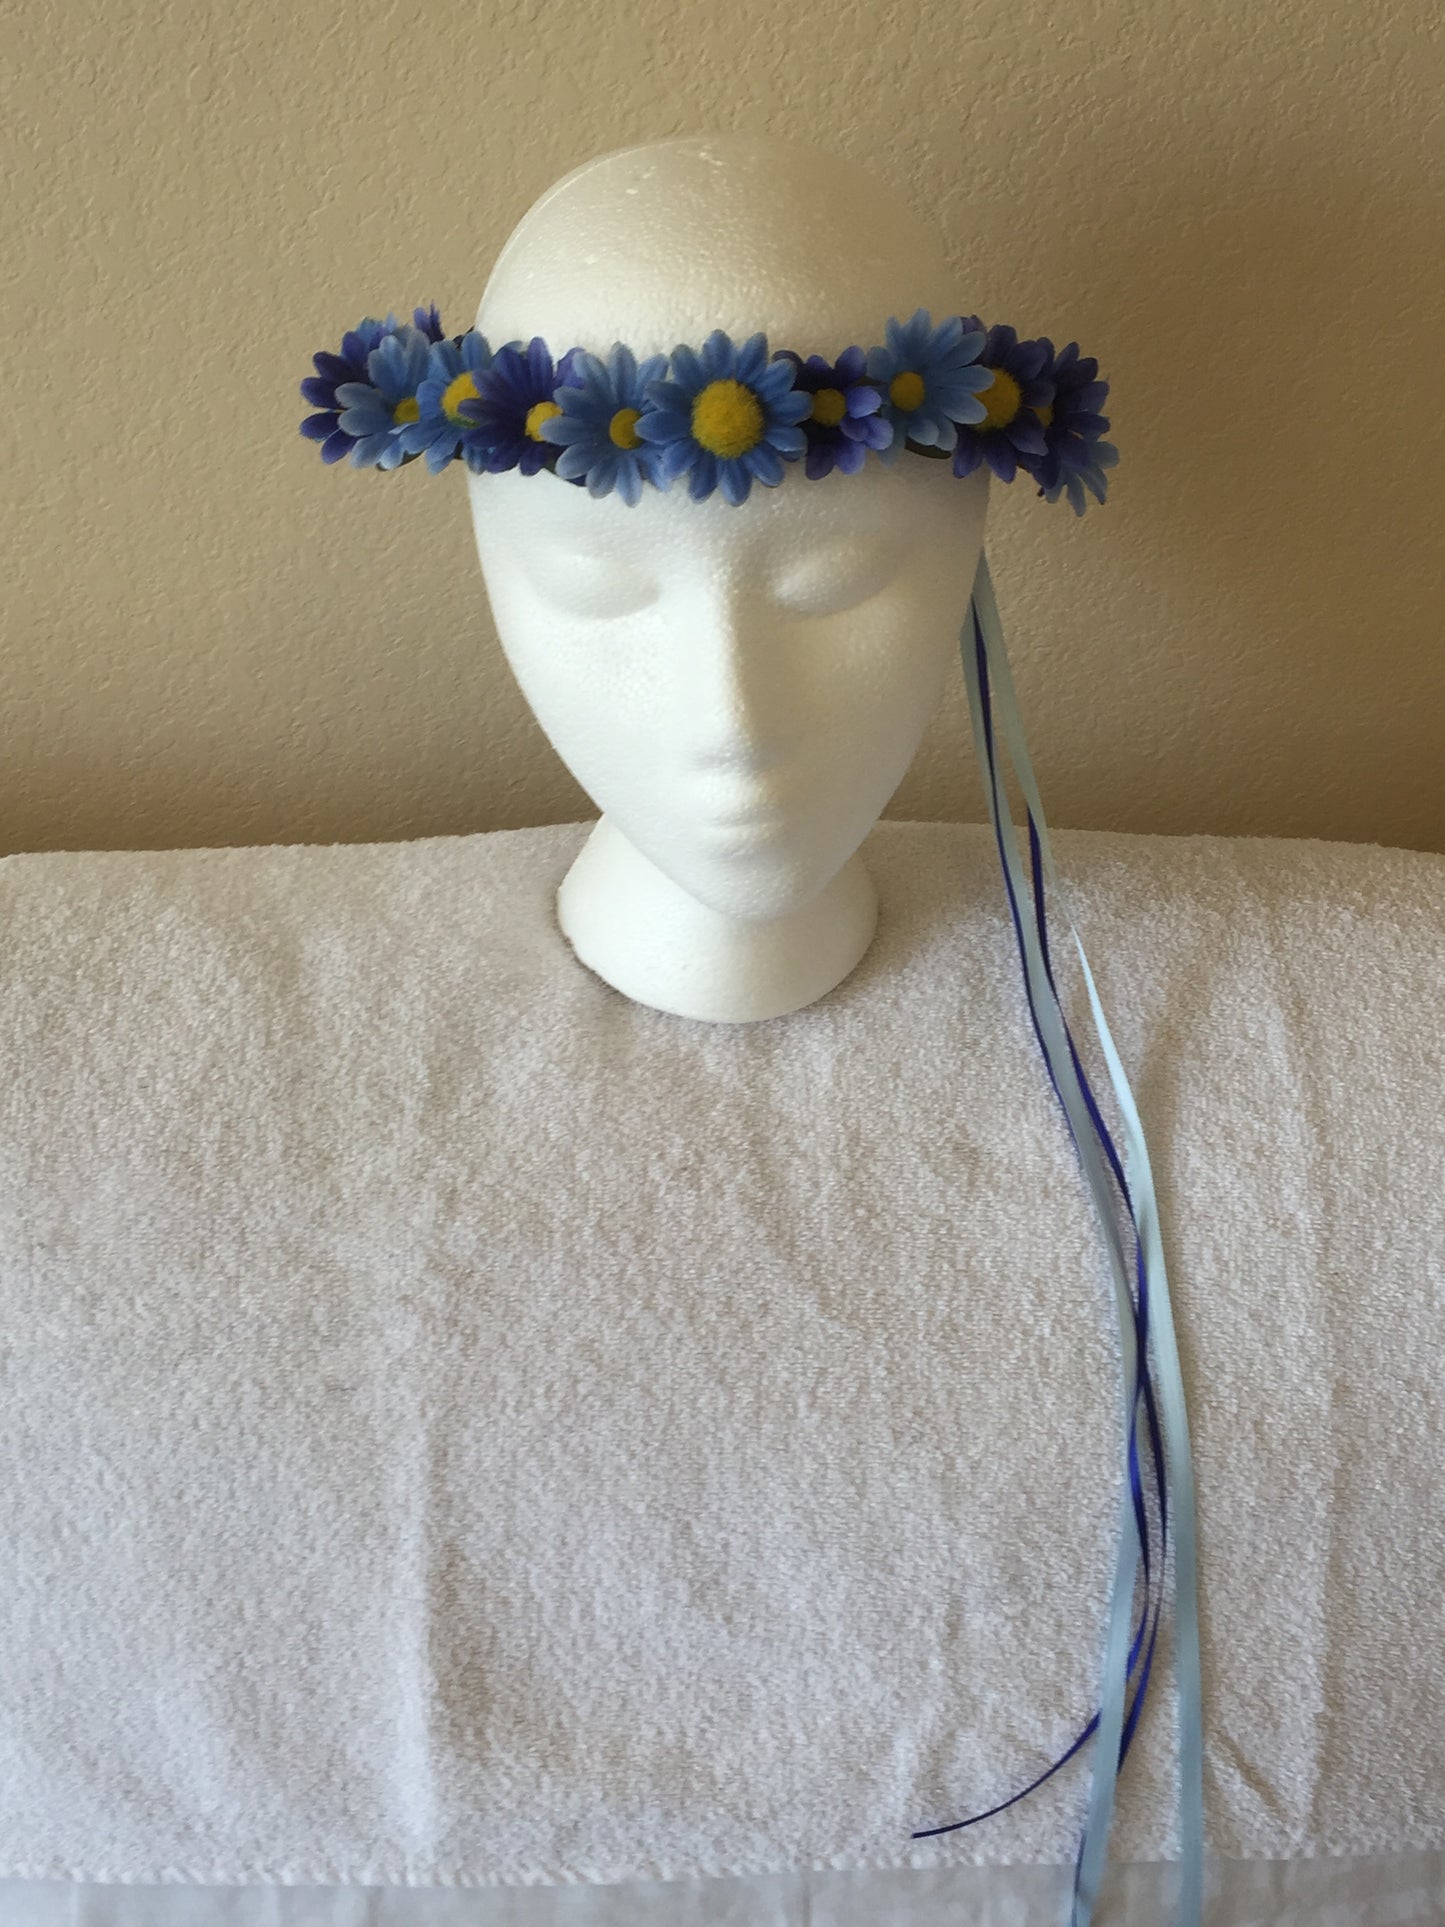 Extra Small Wreath - Blue daisies w/ yellow centers.